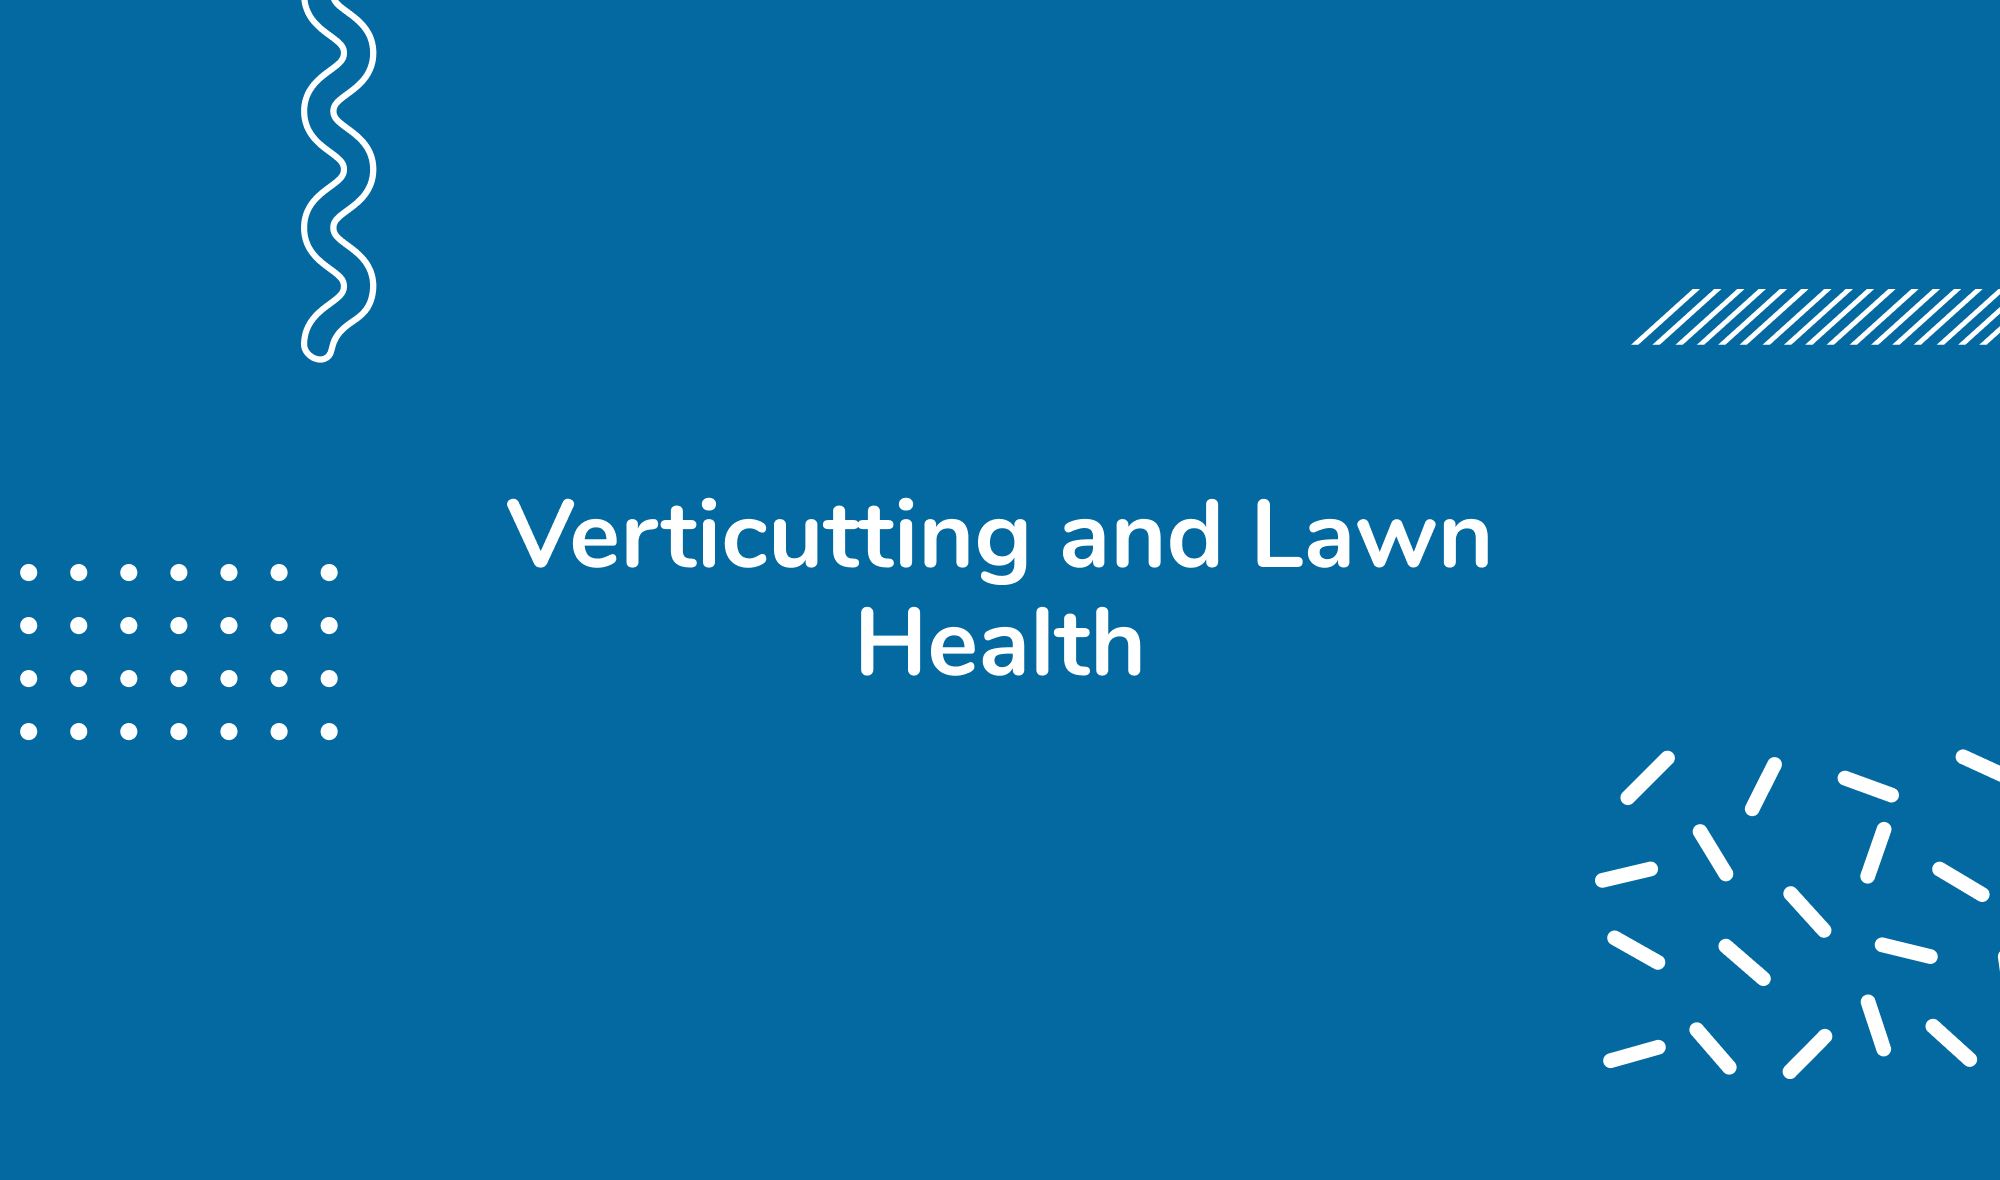 Verticutting and Lawn Health: Why It's Crucial